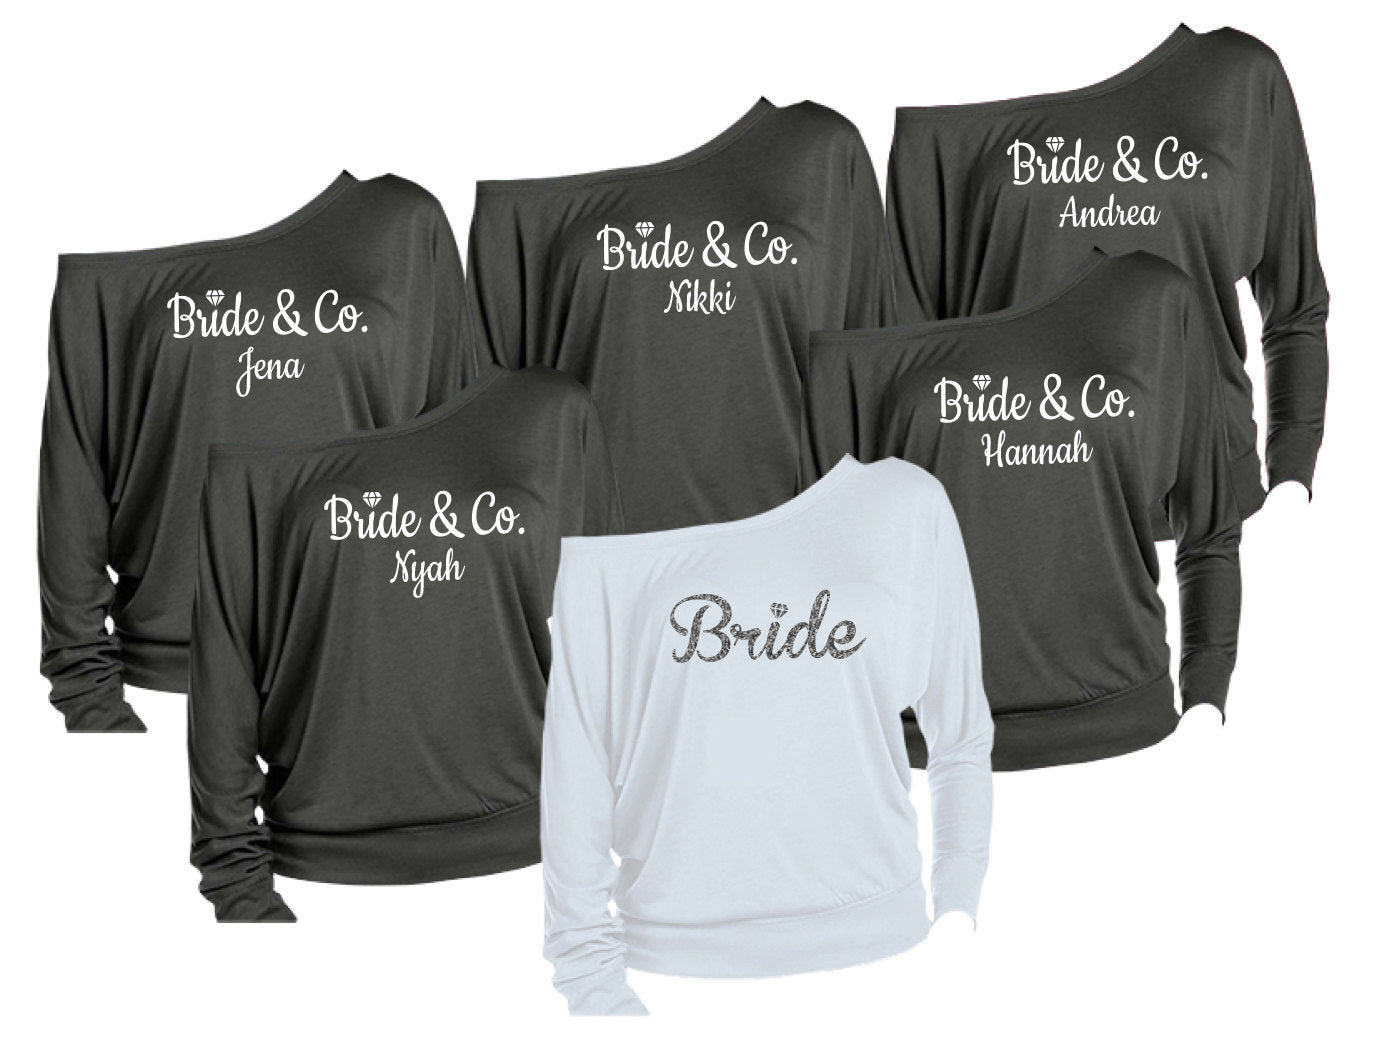 Bride and Bridesmaid shirts, Maid of honor shirt, bride shirt, bride and co shirts, bridesmaid shirts, bachelorette weekend, Nashville party